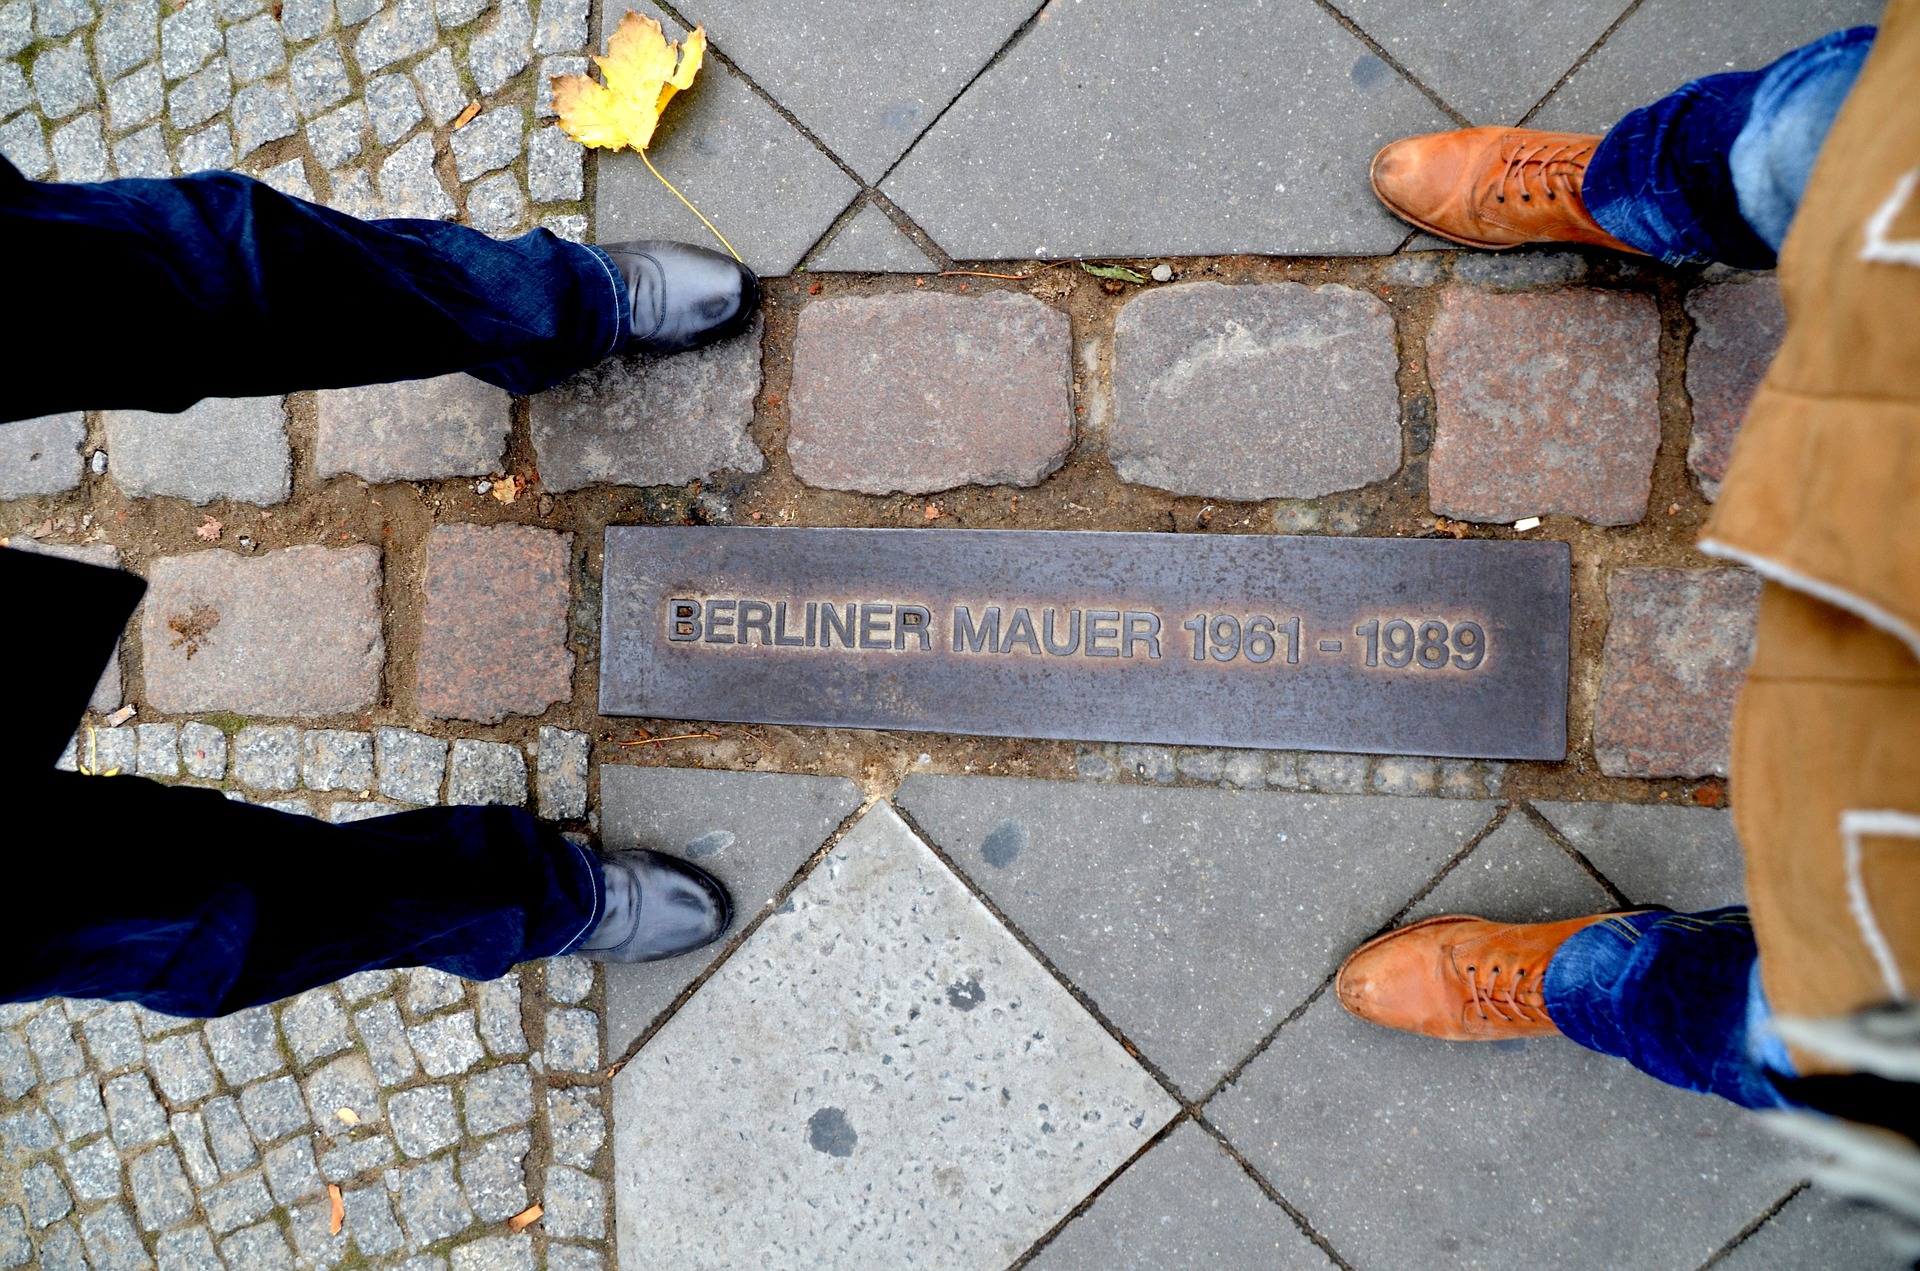 This Week at Index: Looking back at the day the Berlin Wall fell